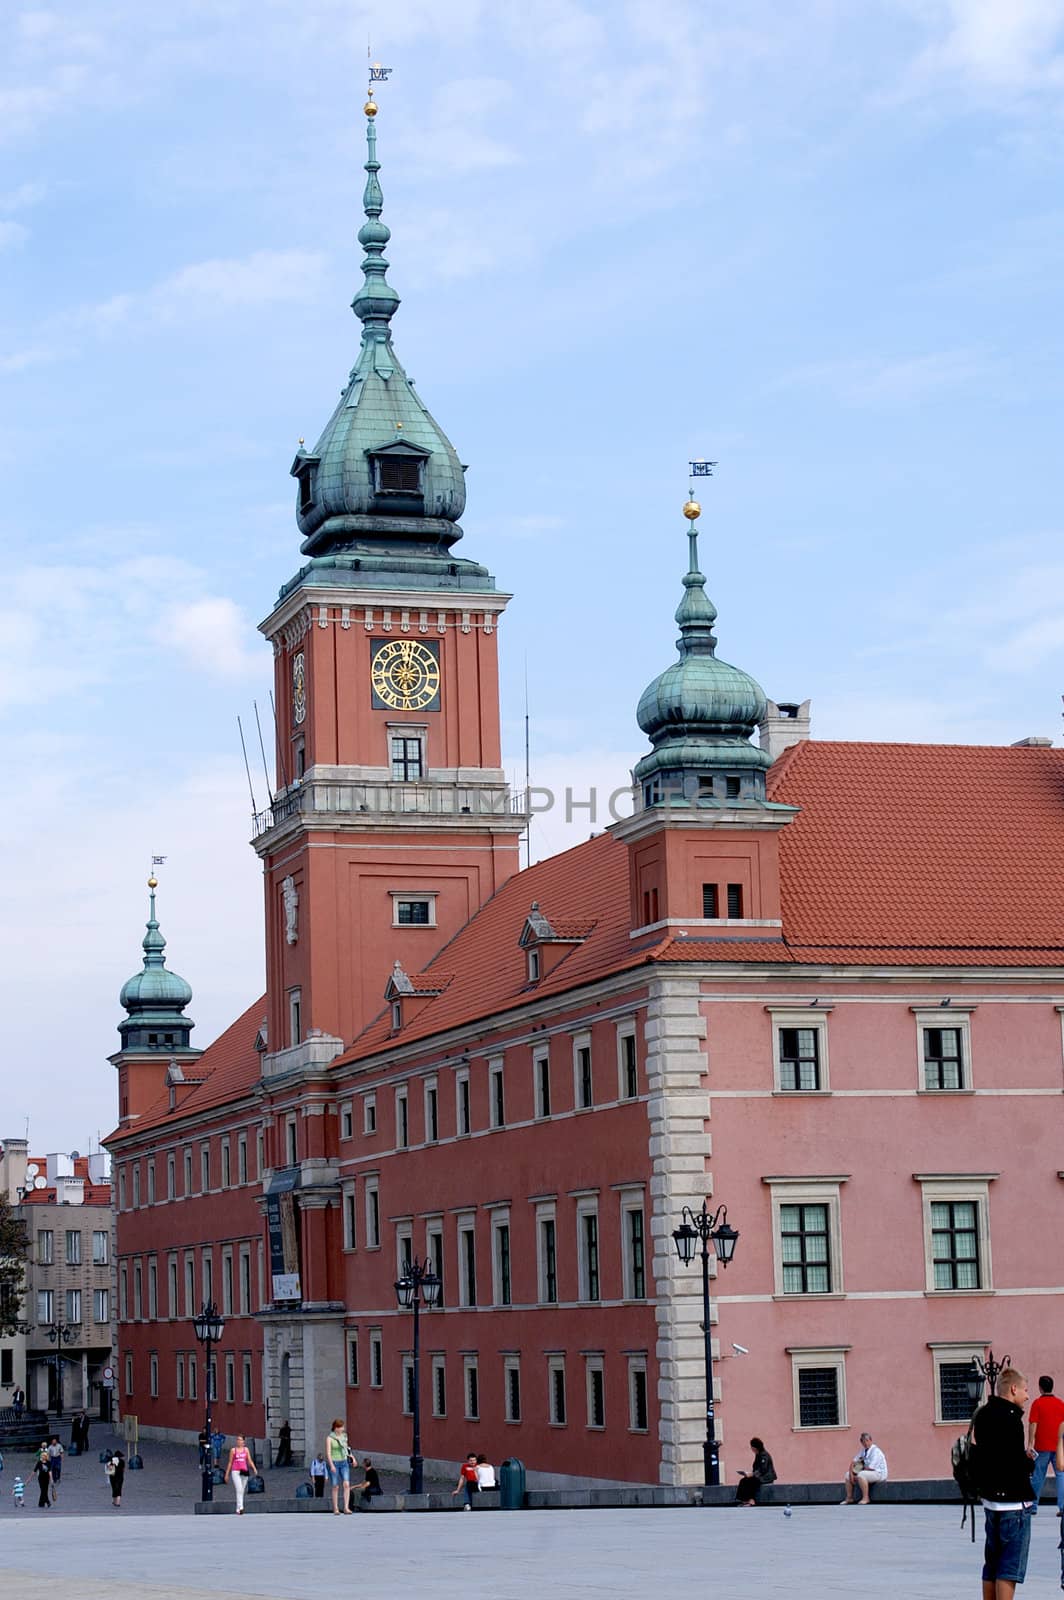 Royal Castle in Old Town, Warsaw, Poland